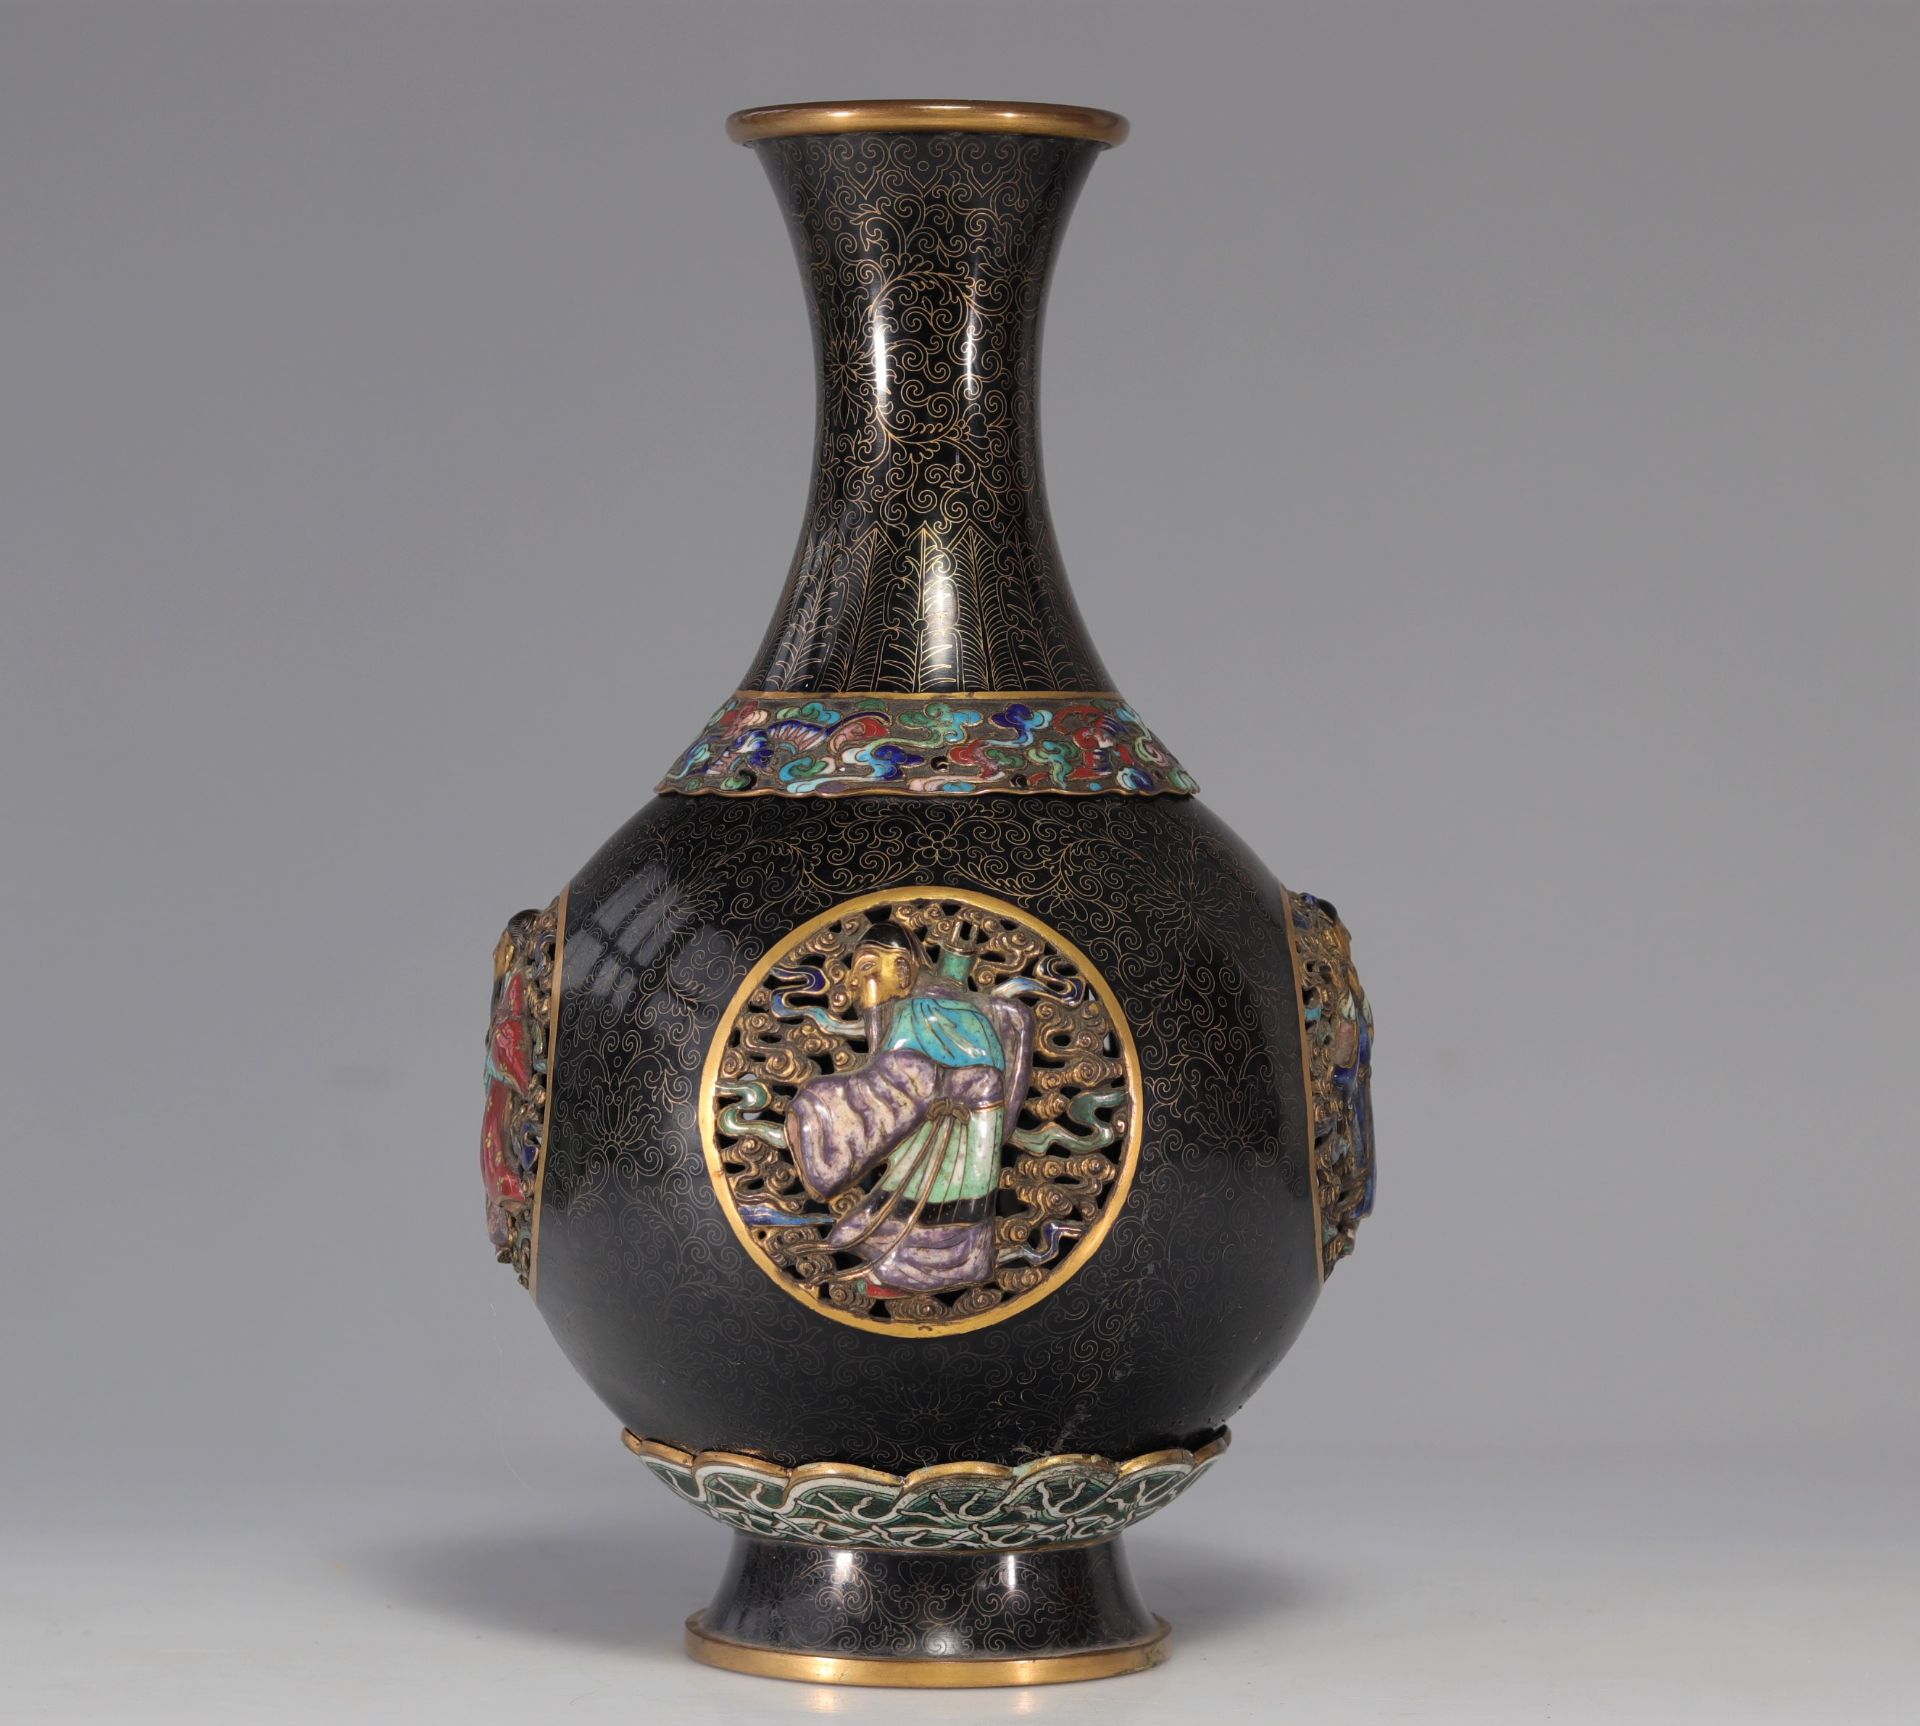 Cloisonne bronze vase decorated with Qing period figures - Image 7 of 9